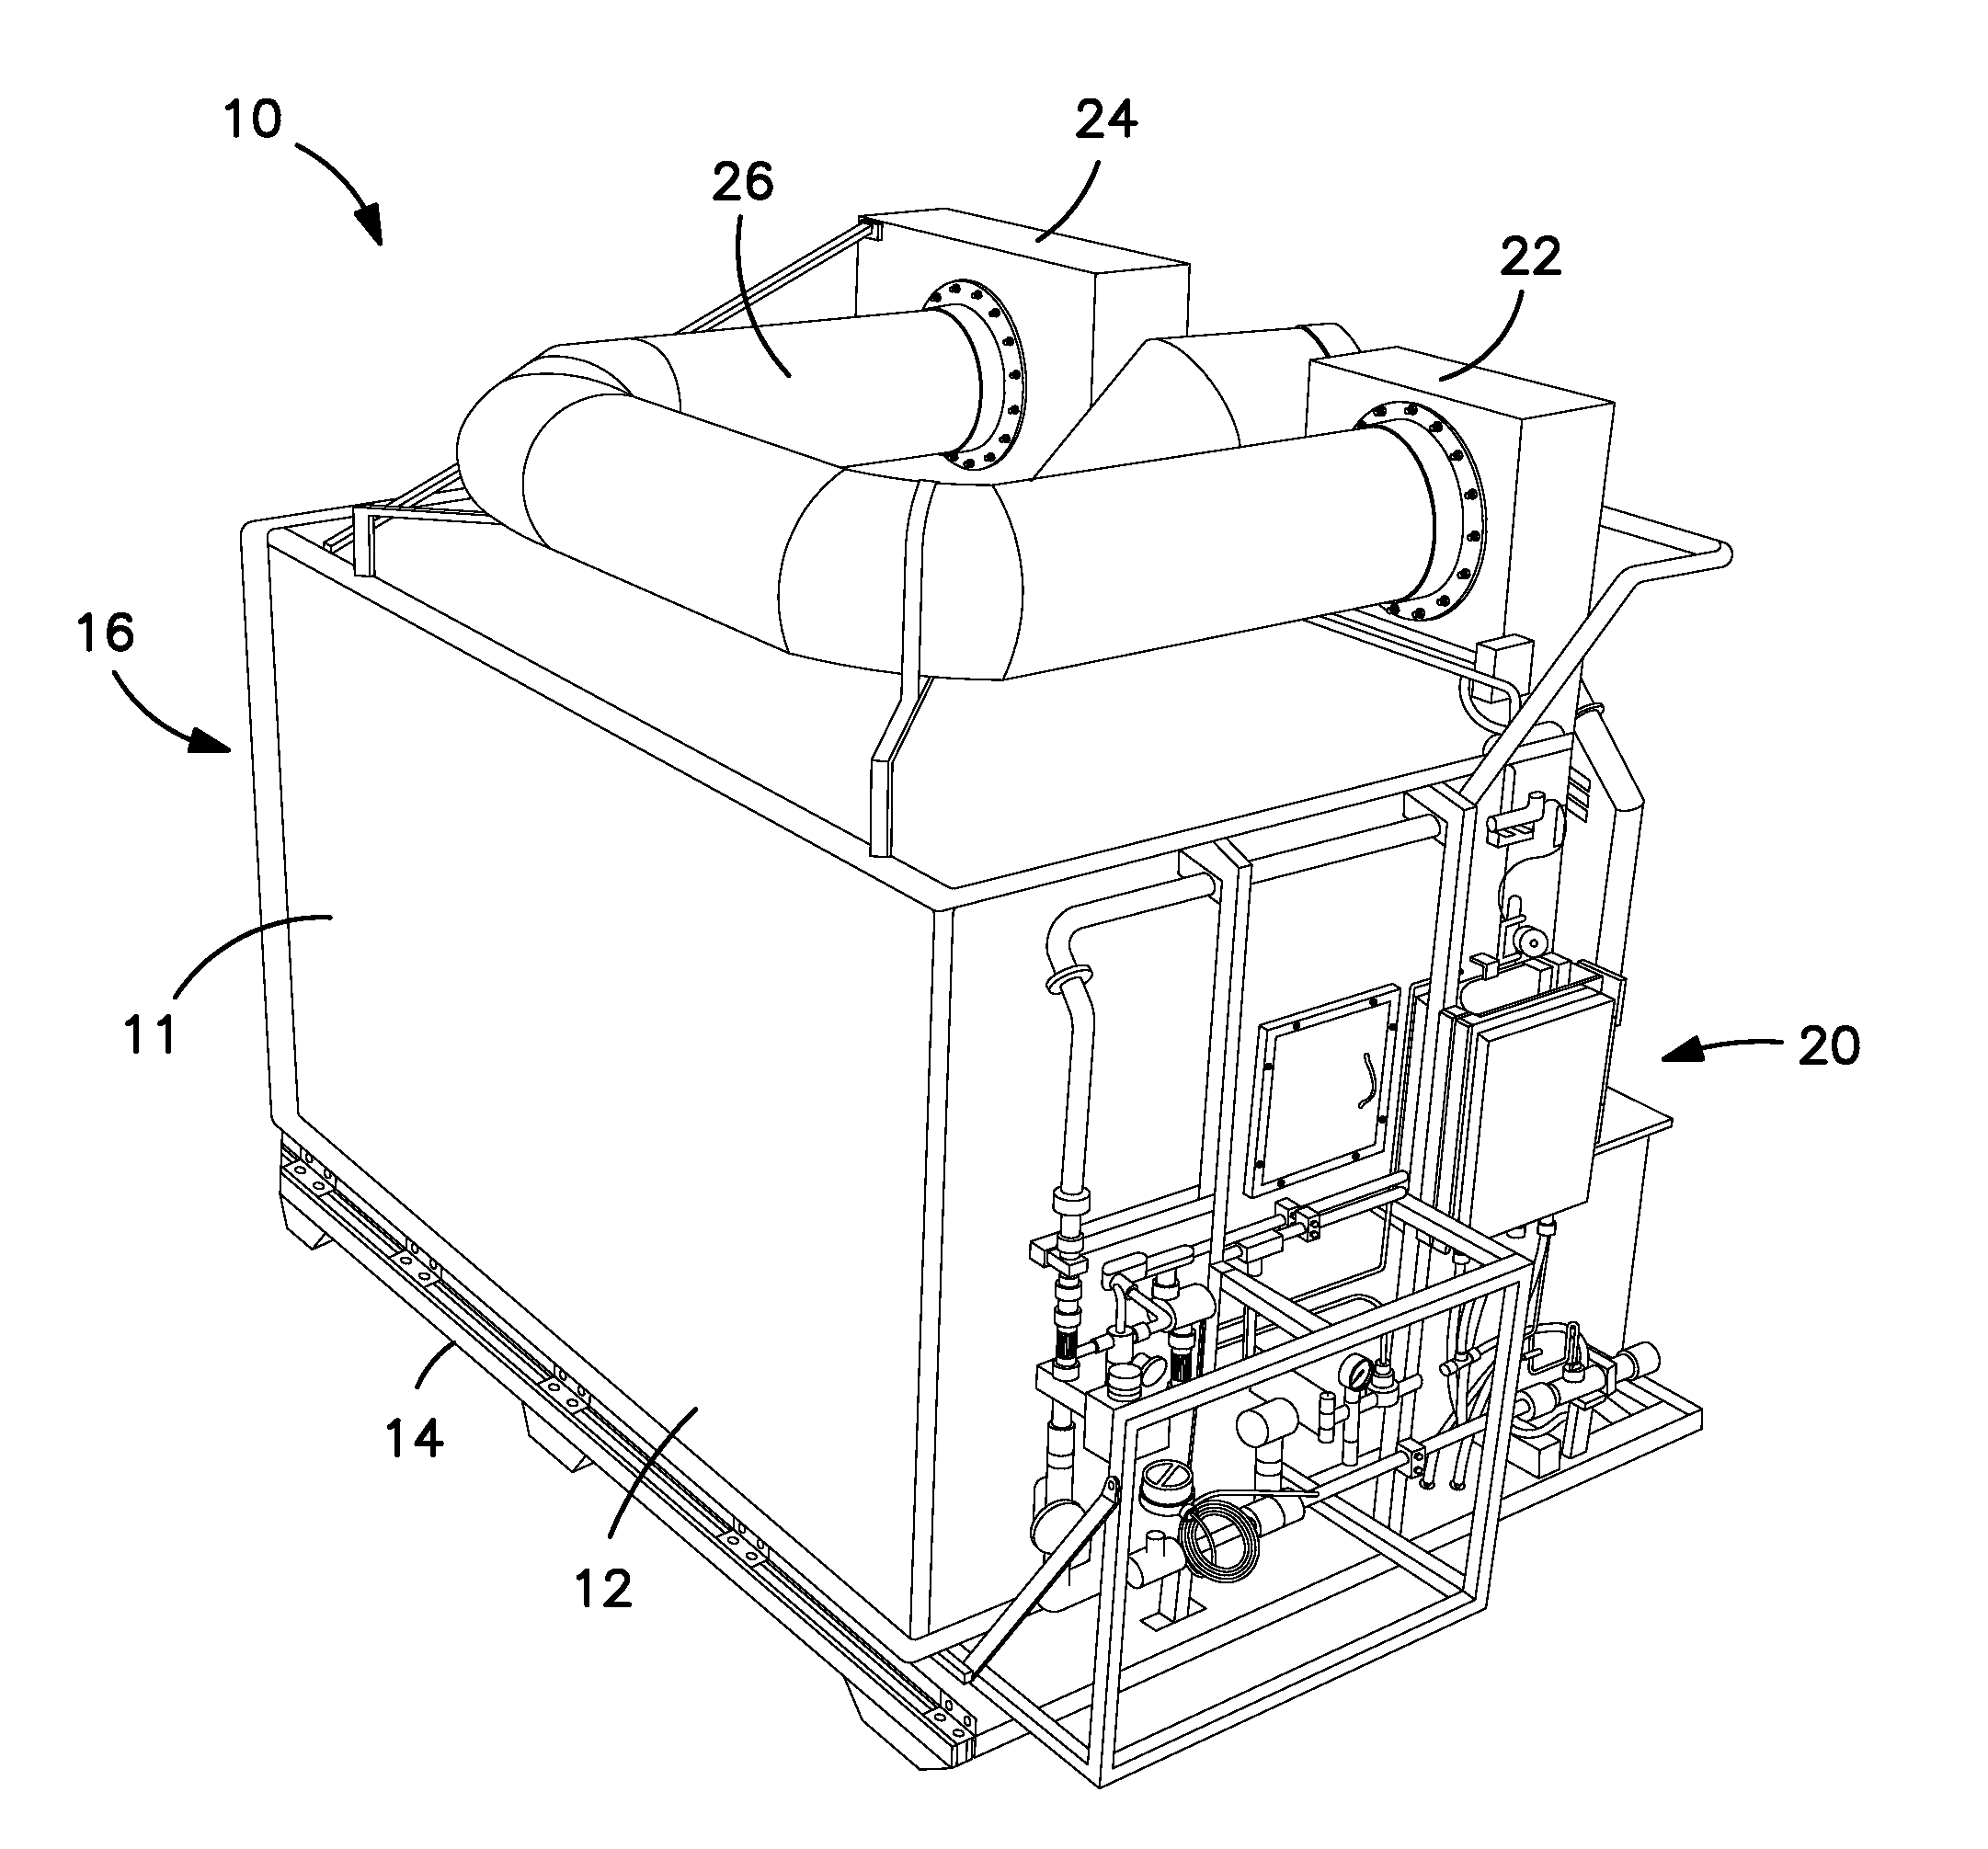 System and method for stunning poultry with gas